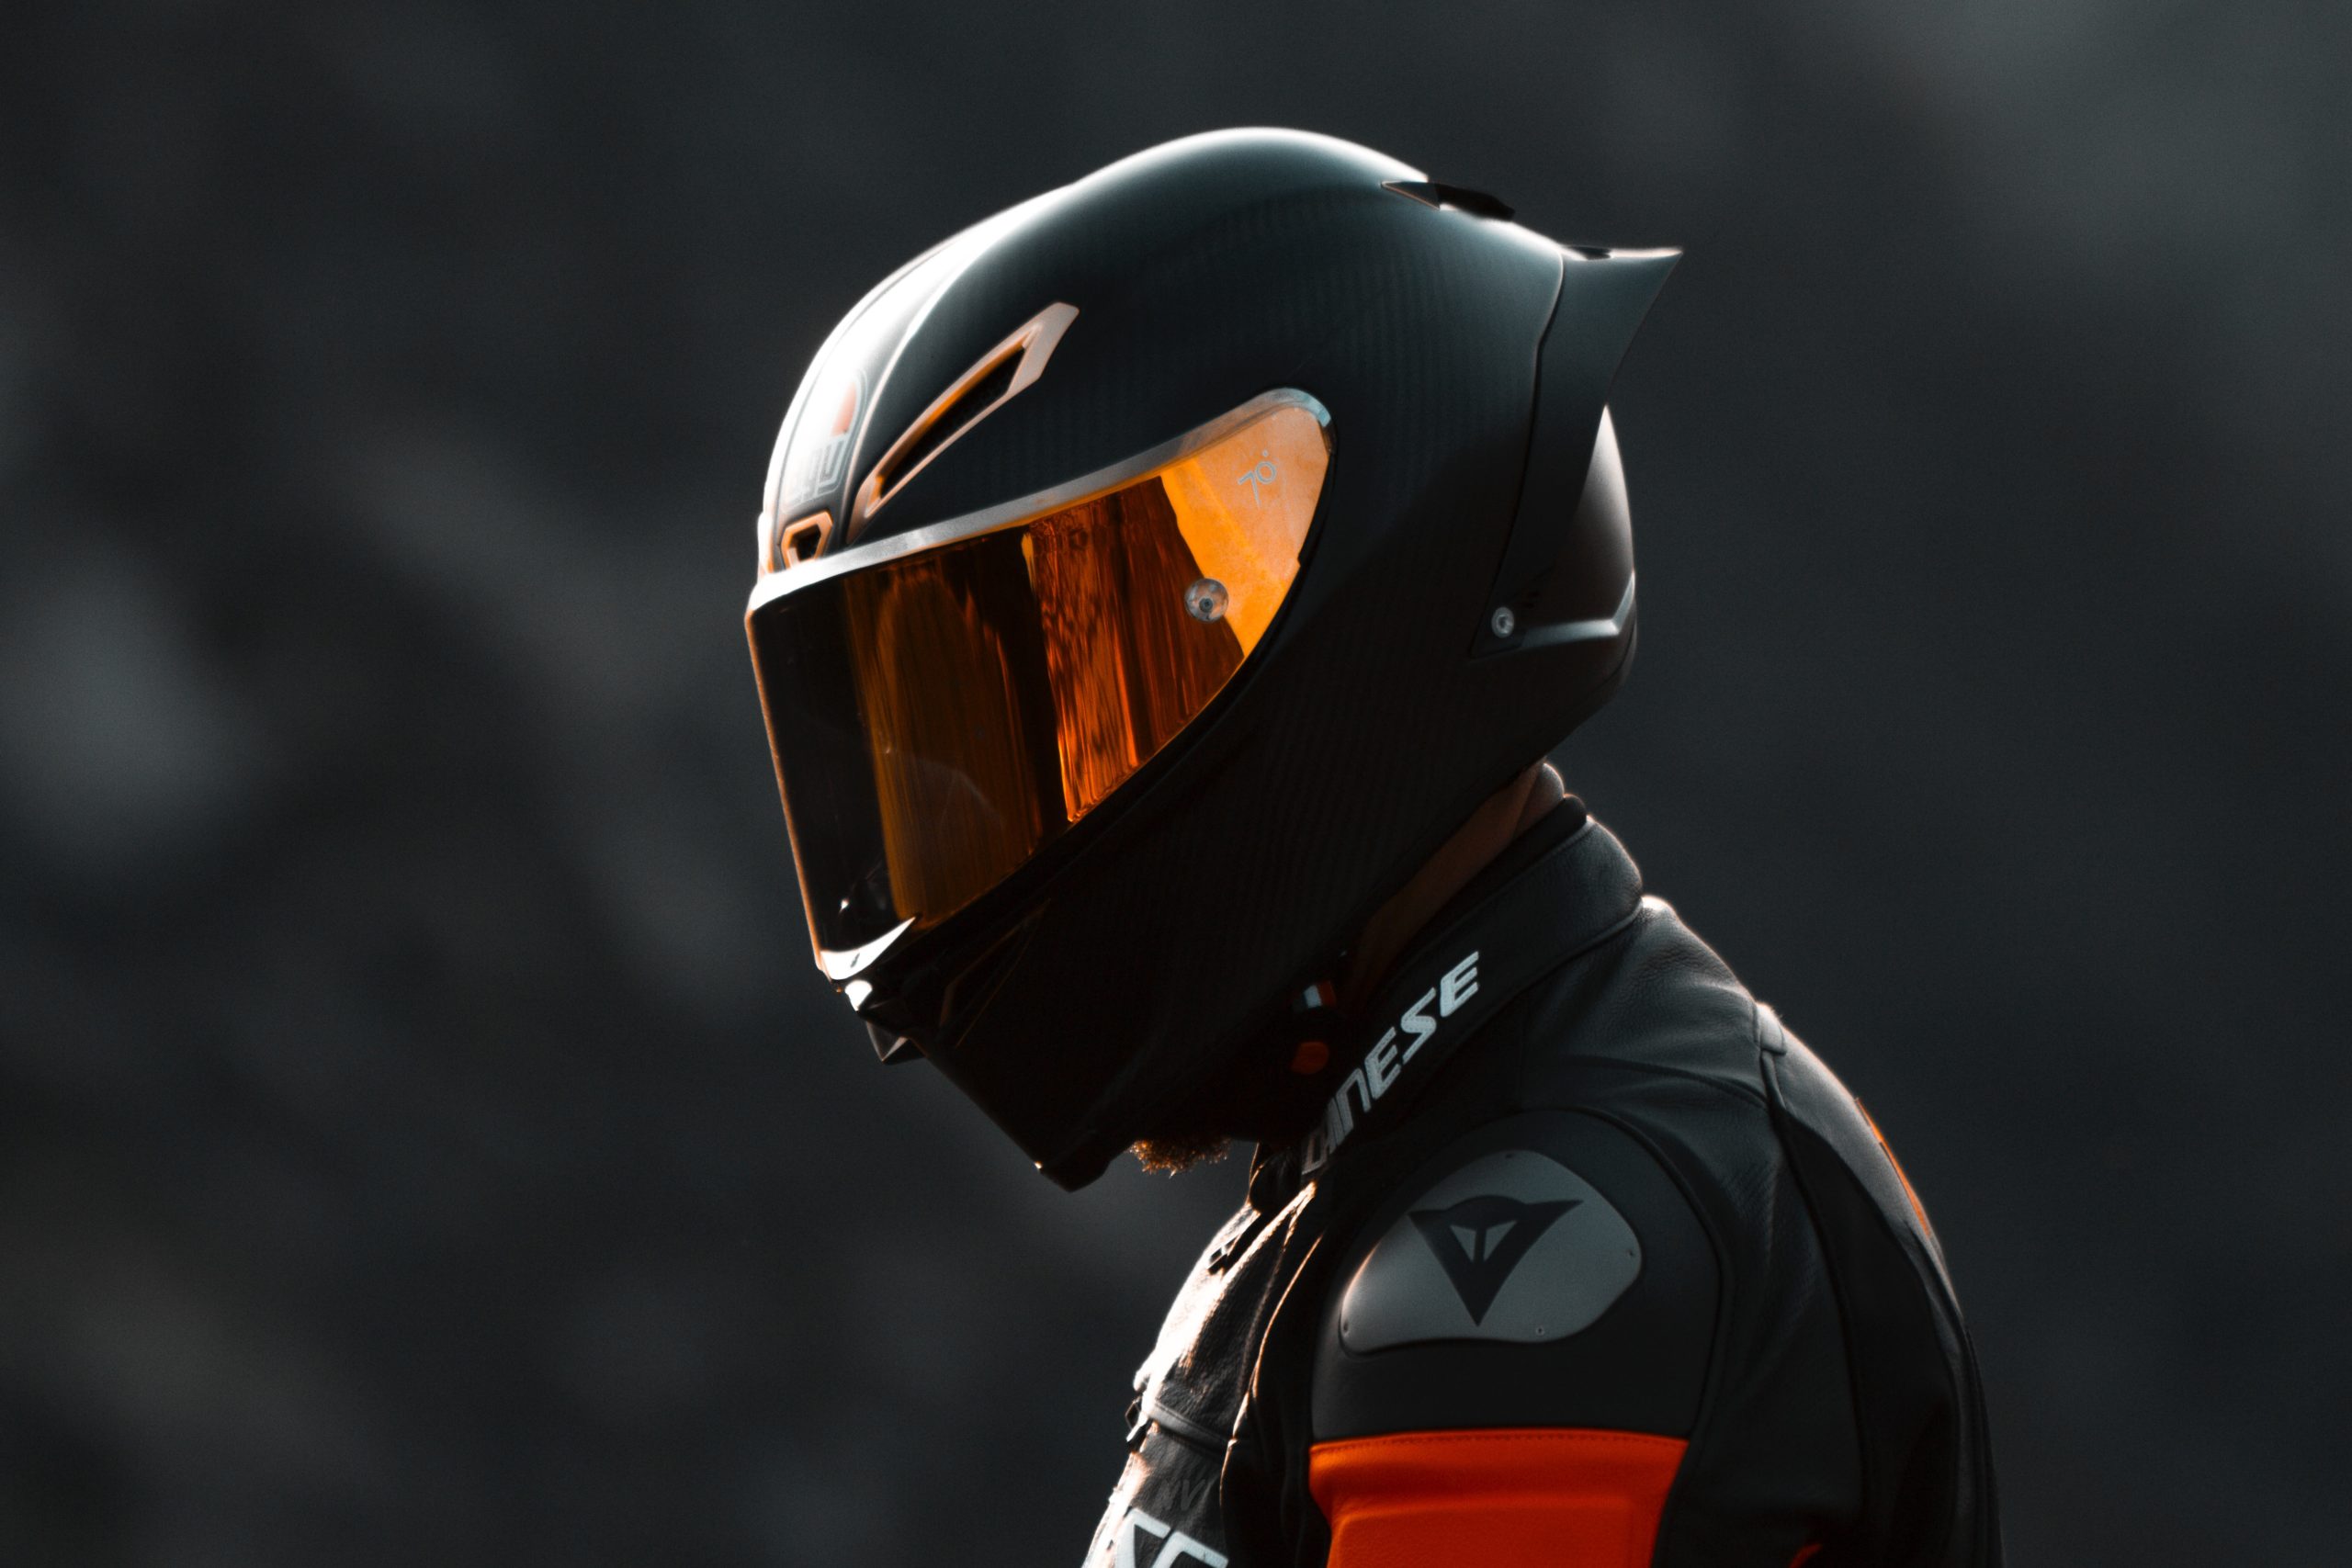 How To Make A Motorcycle Helmet Fit Better (Tips For Safety)